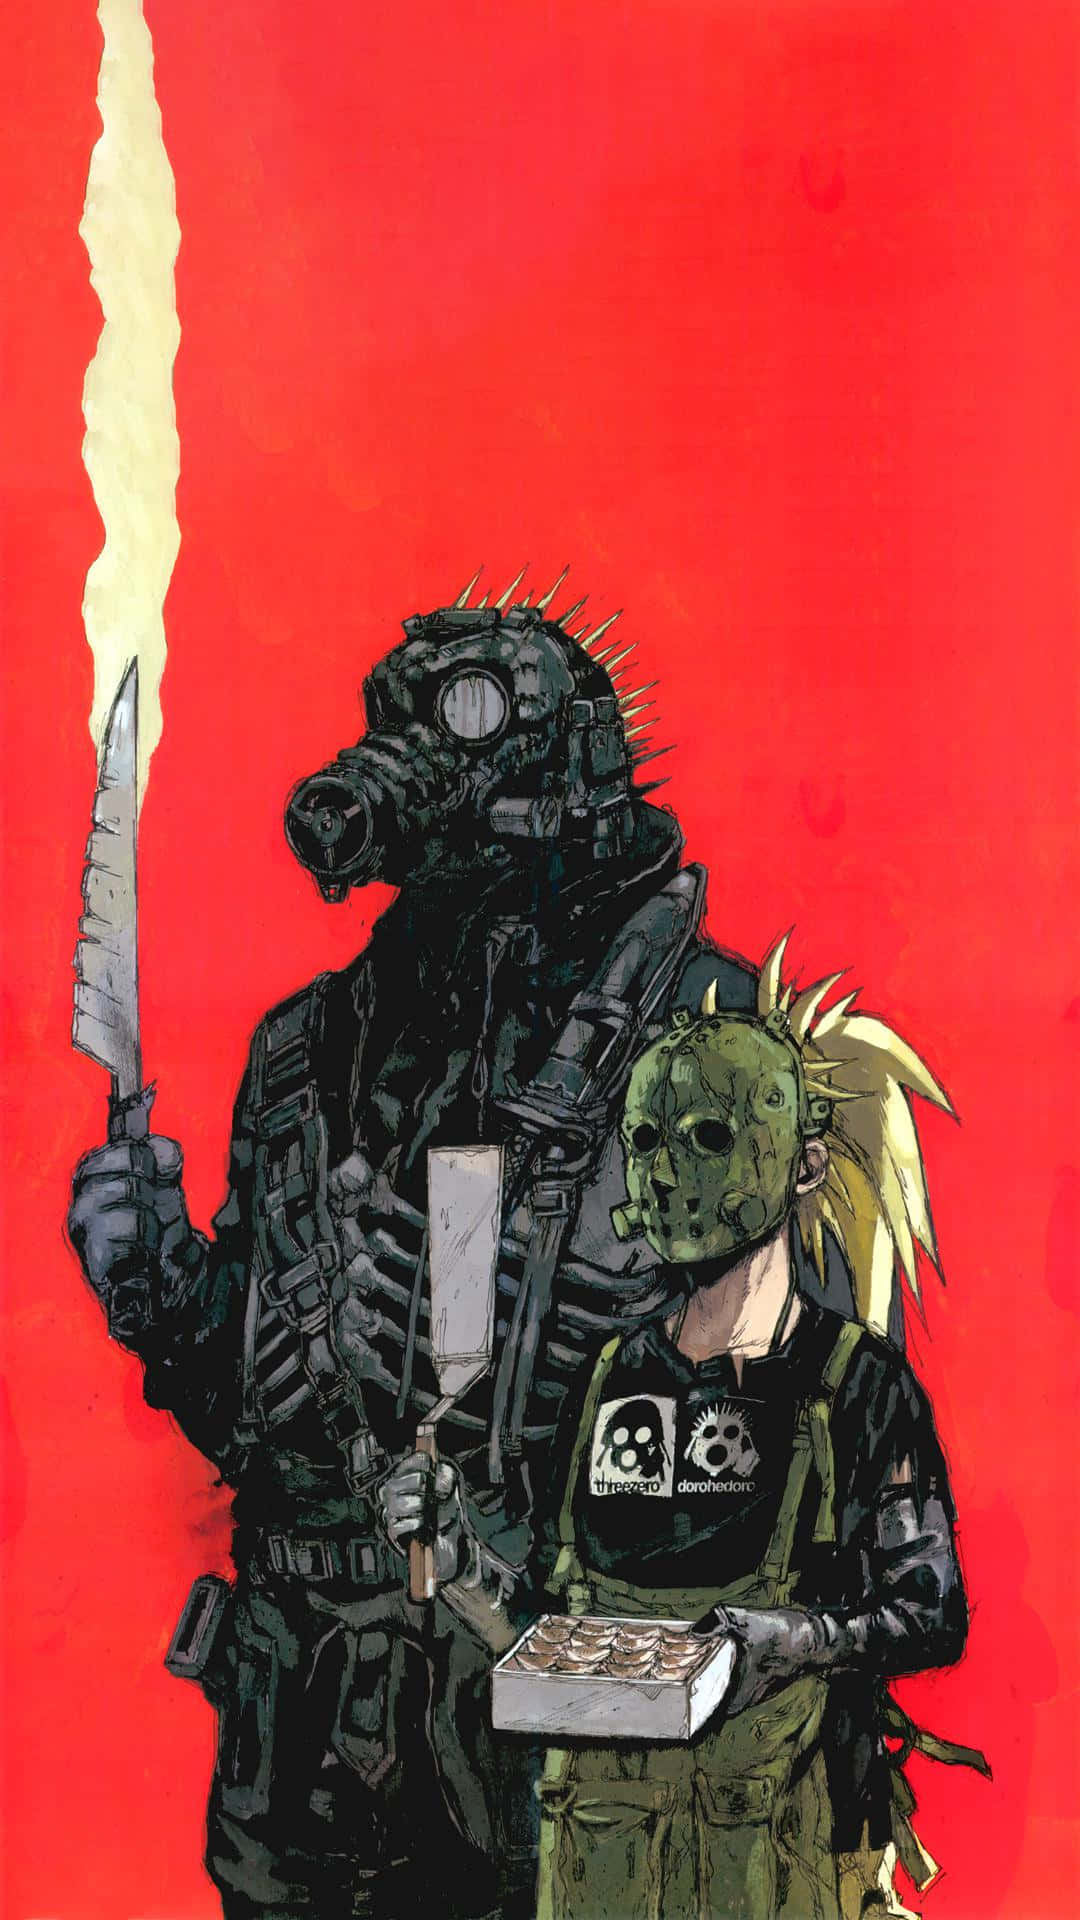 Discover the surreal world of Dorohedoro Wallpaper